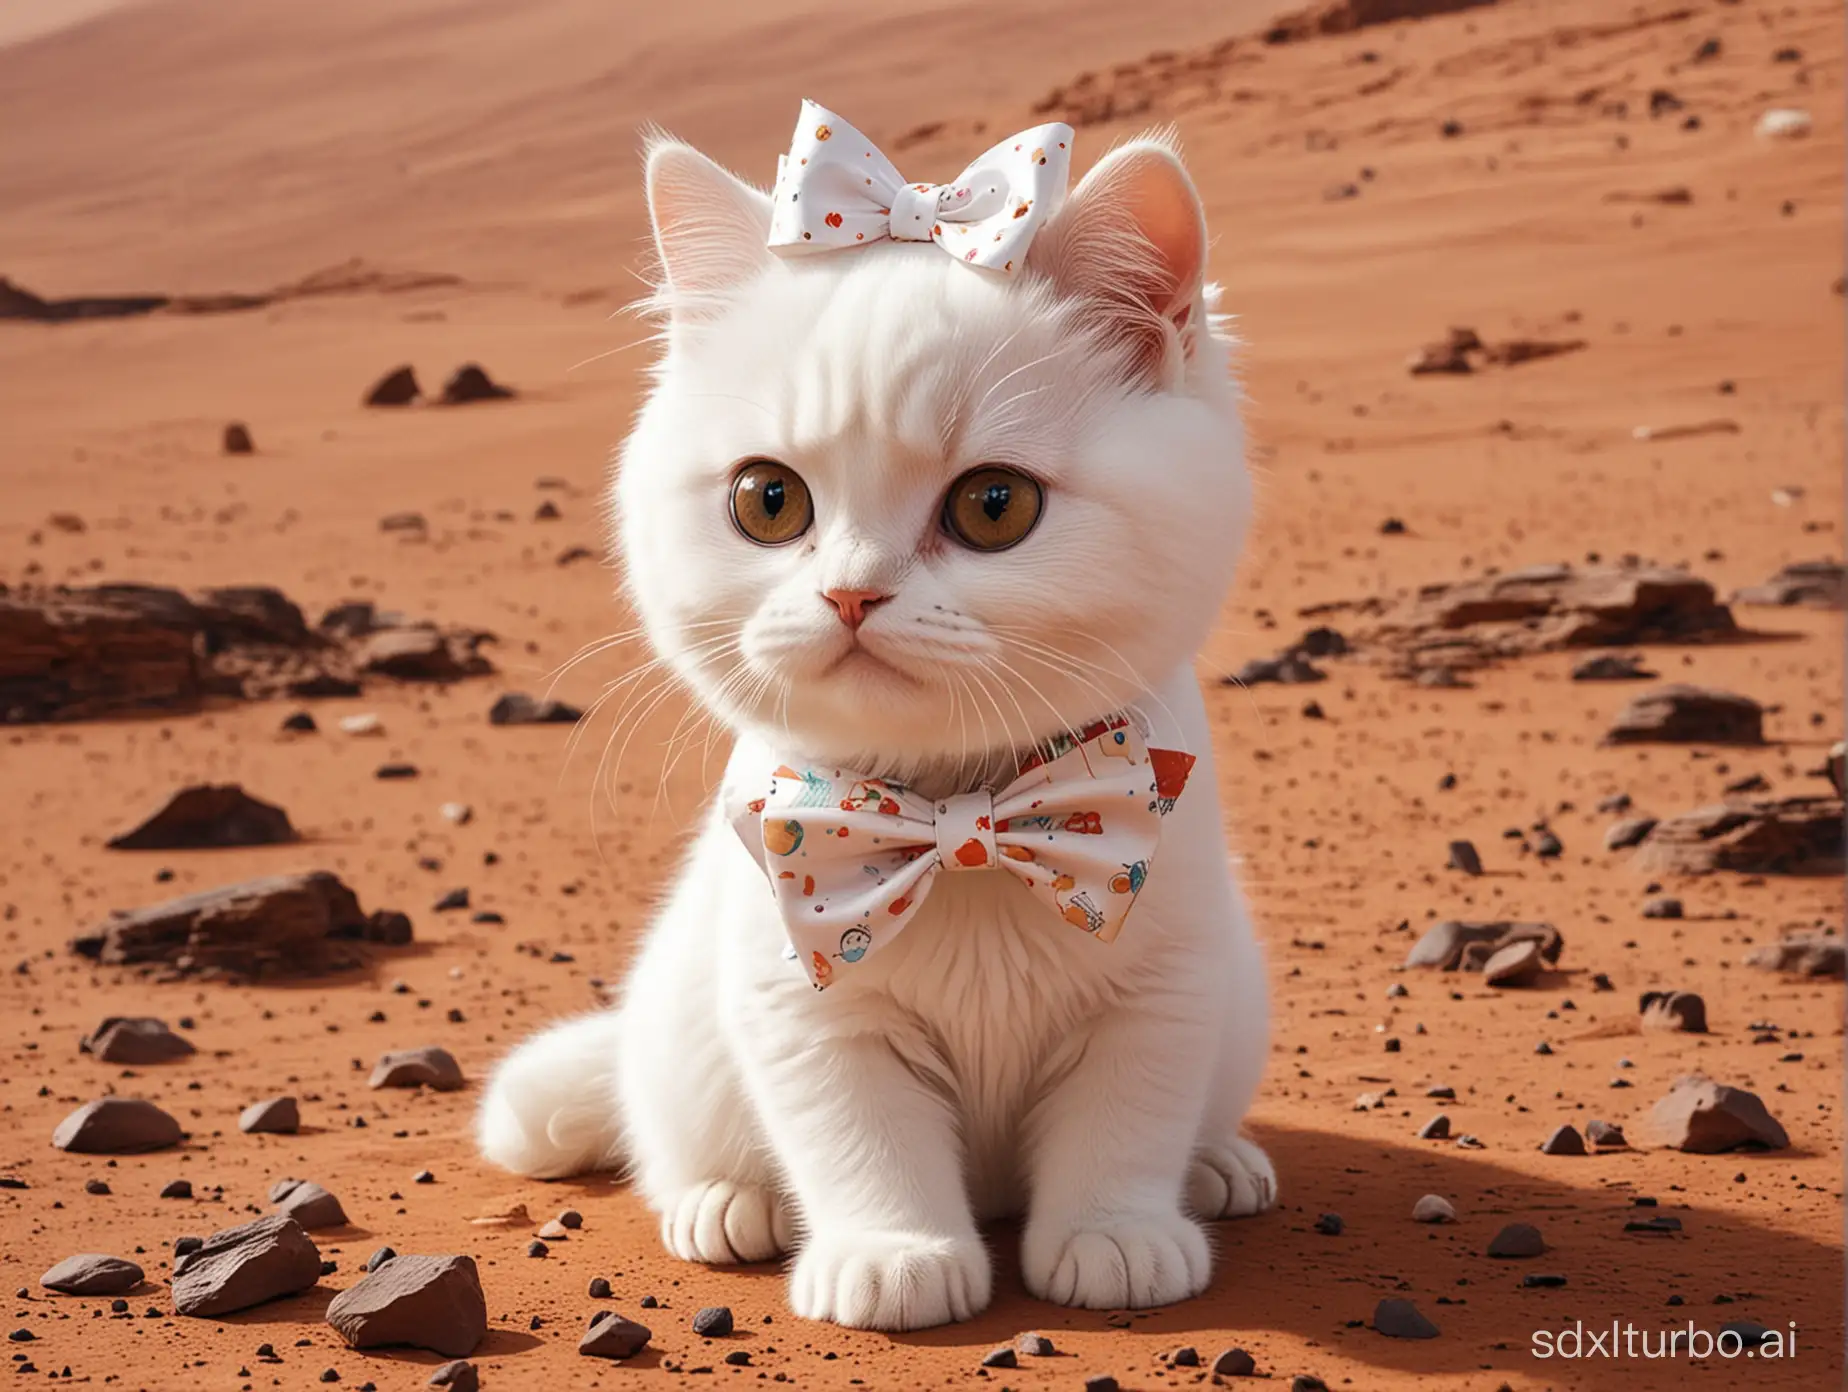 The cute white cat on Mars is wearing a lovely bow.